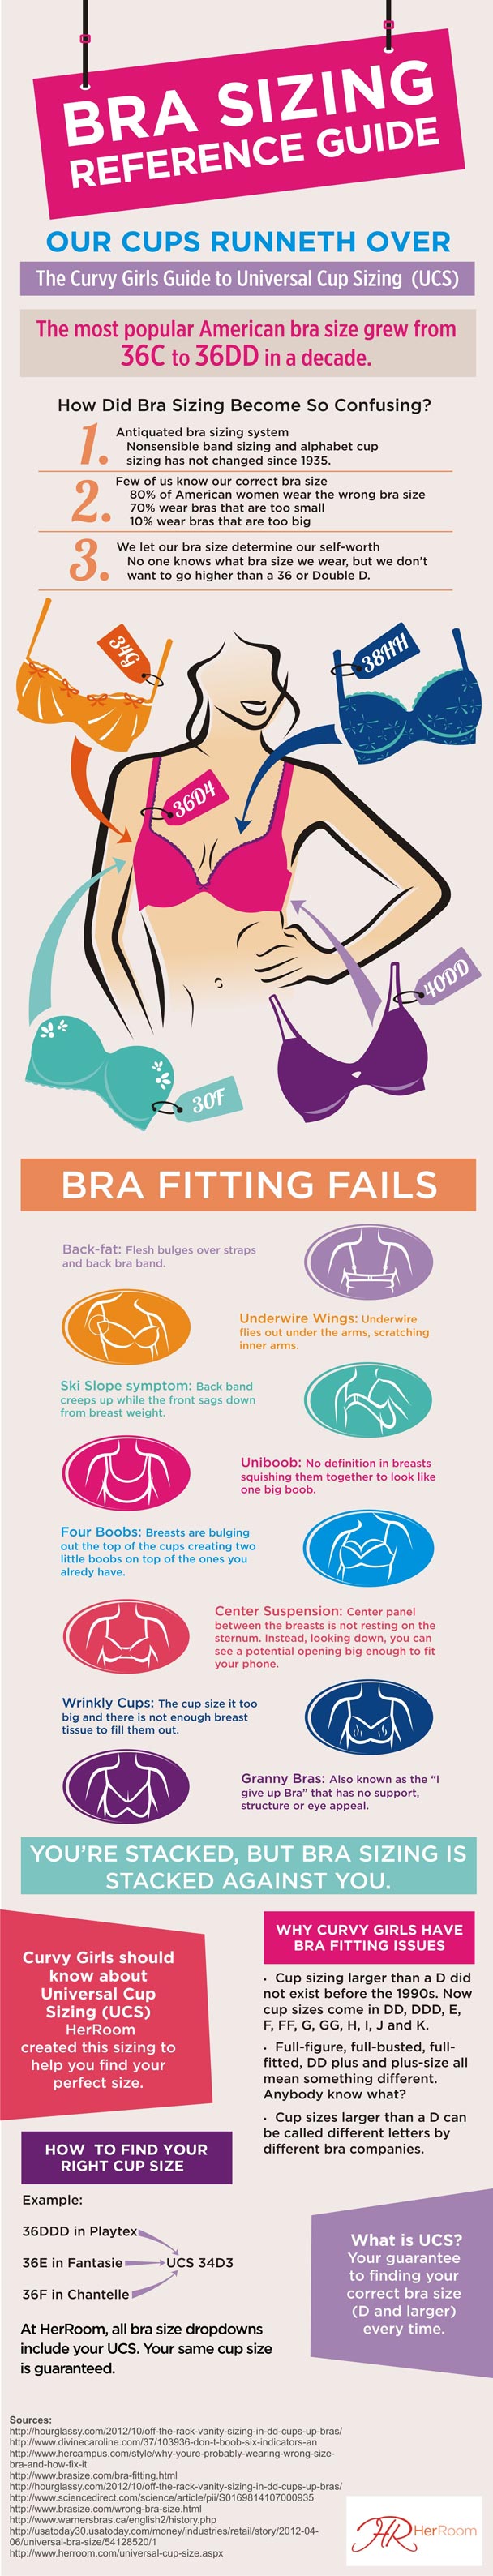 Bra Sizing Reference Guide